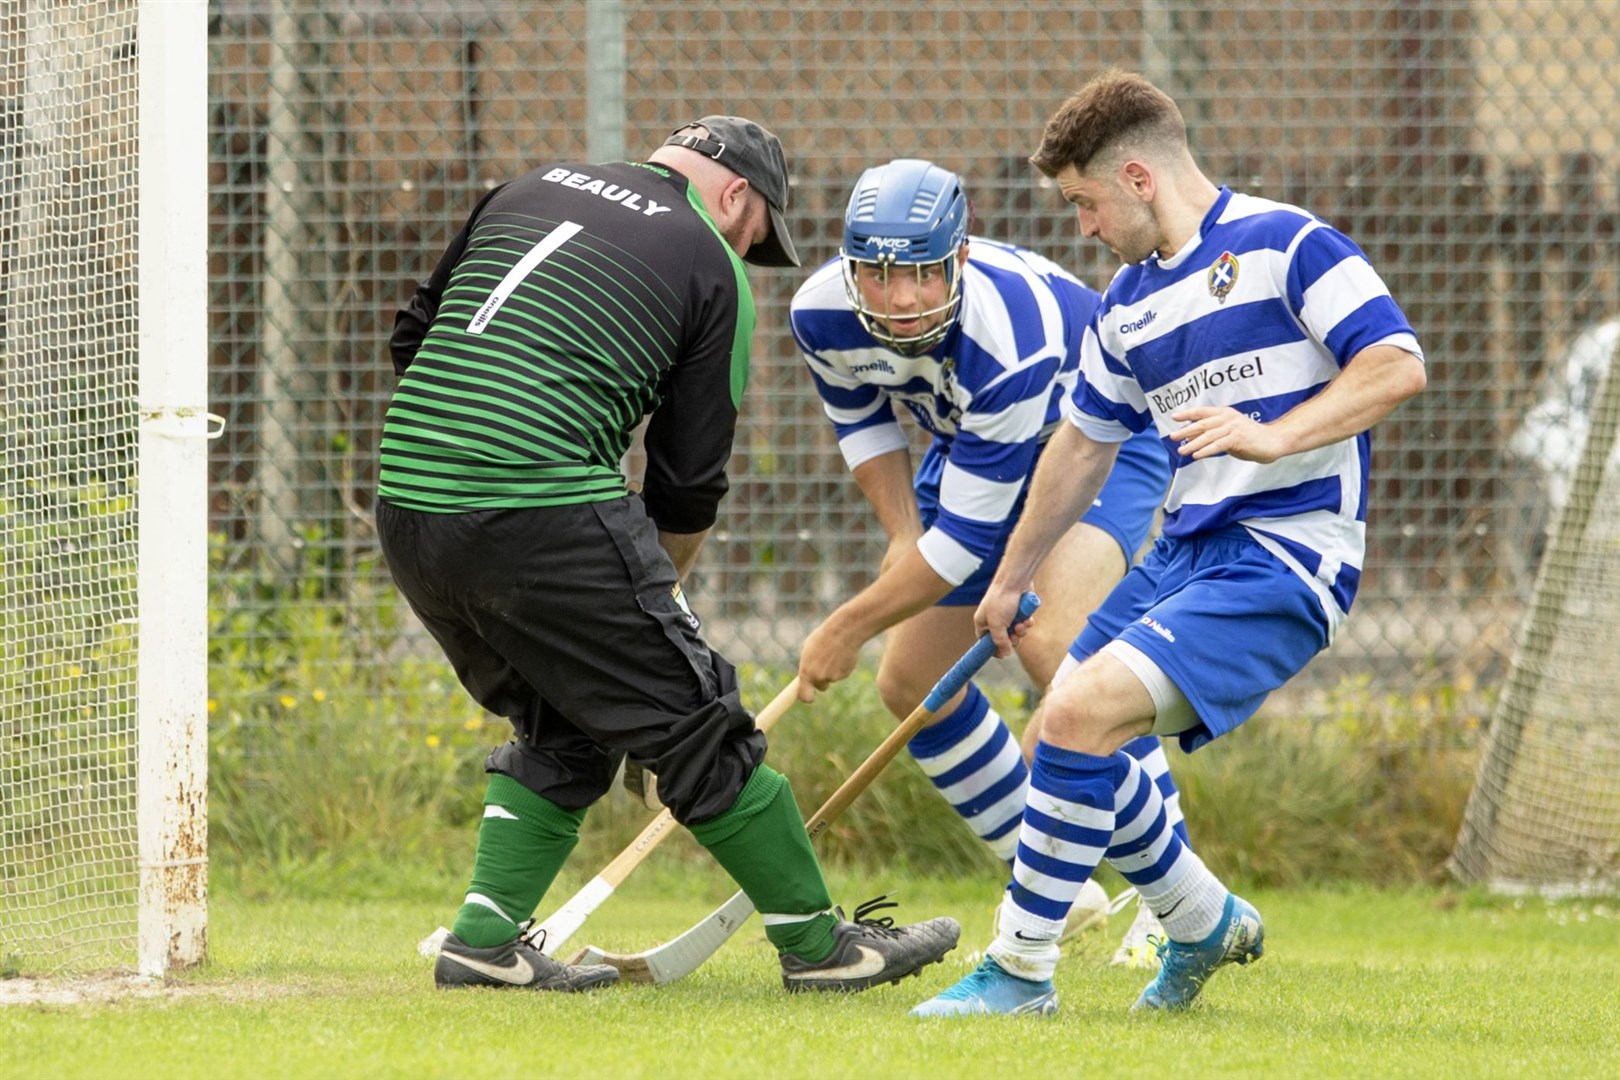 Newtonmore duo Iain Robinson (centre) and Drew Macdonald put pressure on Beauly keeper Mackay Murray. Beauly v Newtonmore, in the Mowi Senior League B. First competitive game back after Covid restrictions.